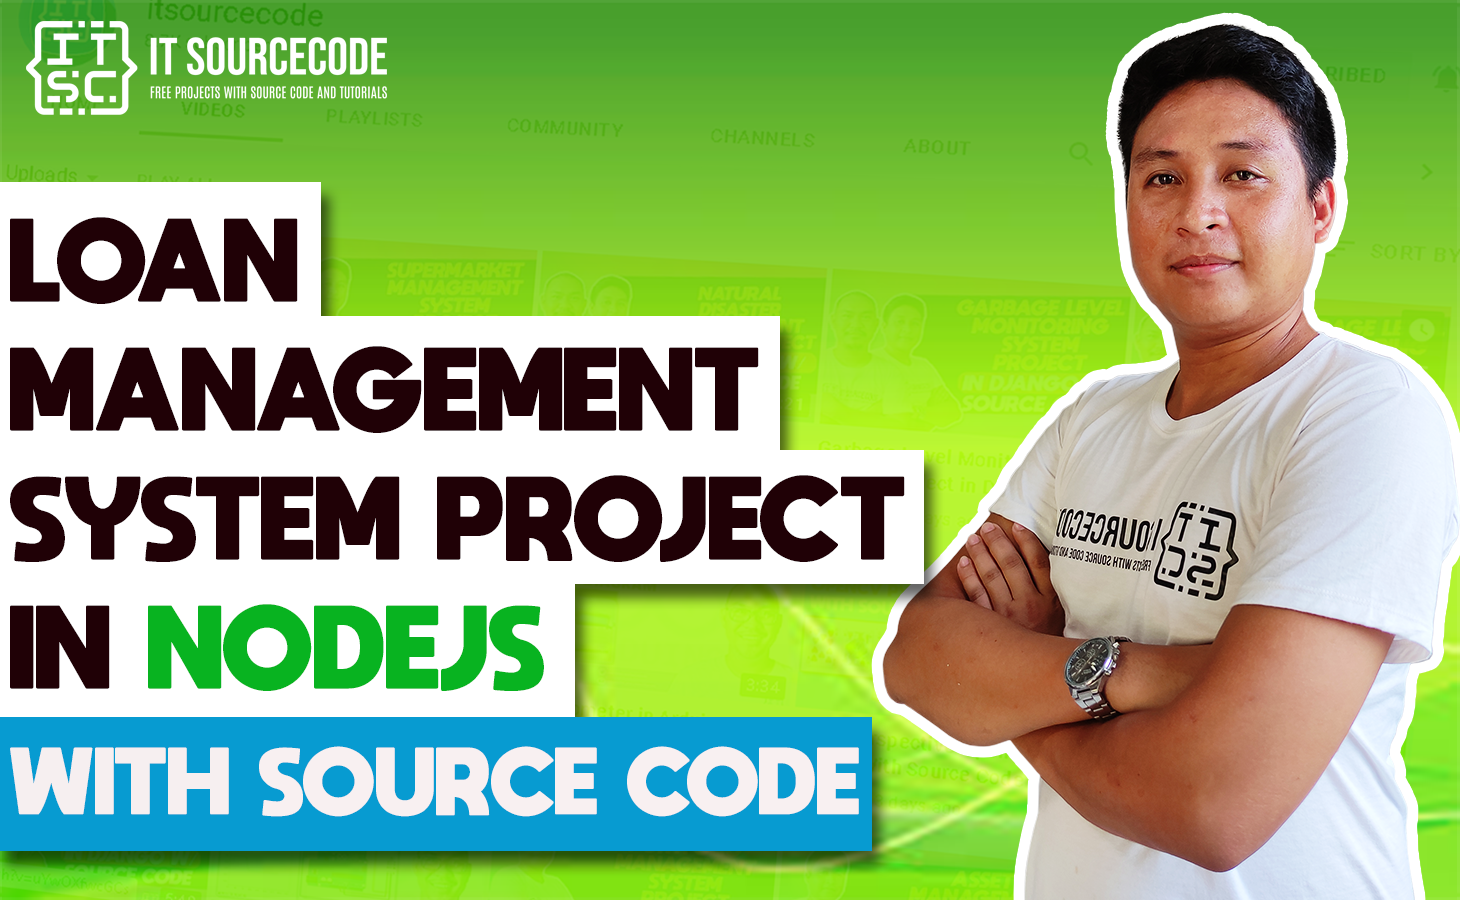 Loan Management System Project in Node JS with Source Code